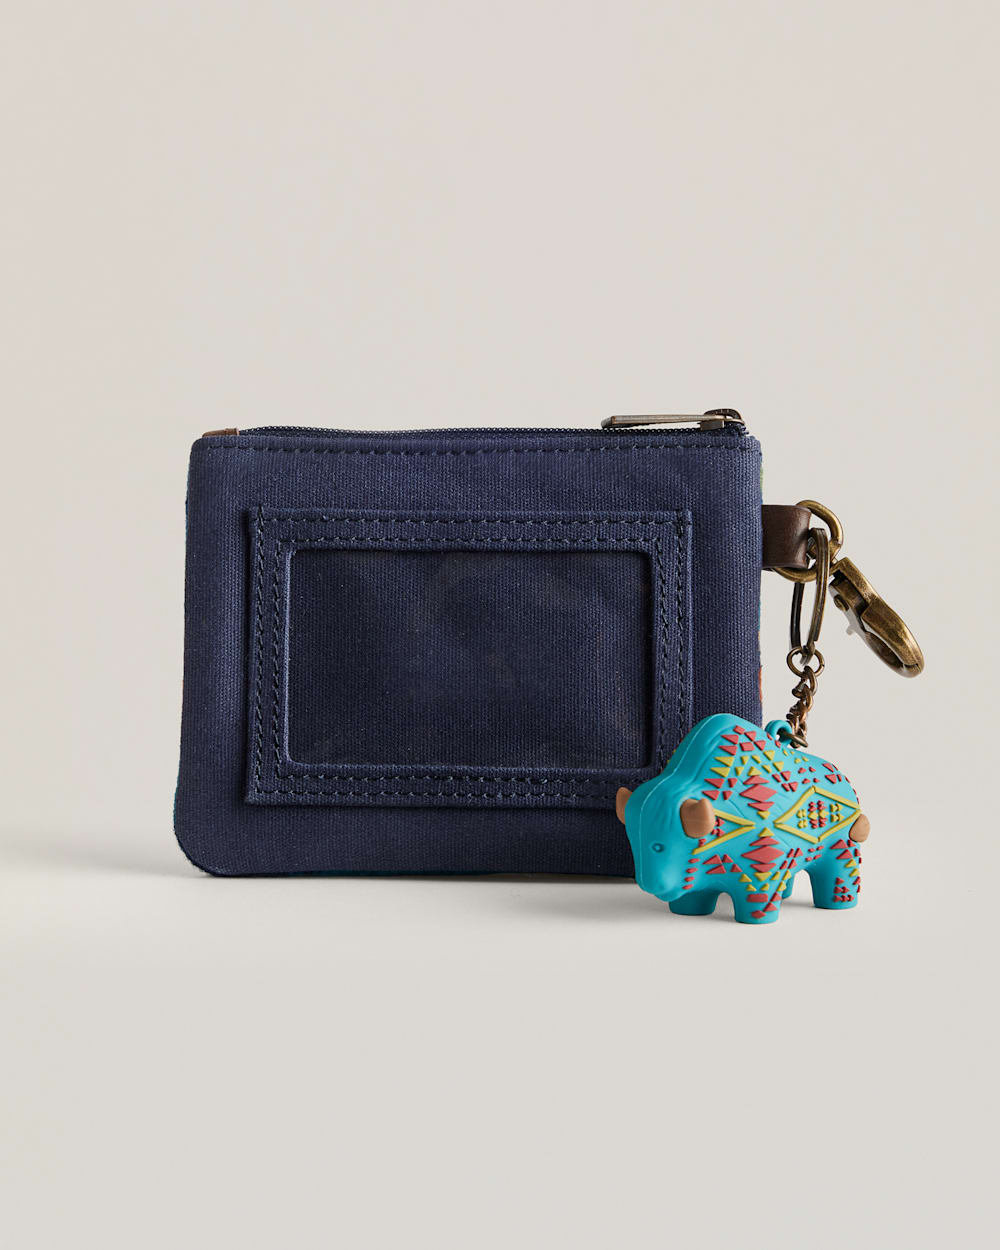 ALTERNATE VIEW OF DIAMOND DESERT ID POUCH IN BLUE MULTI image number 2